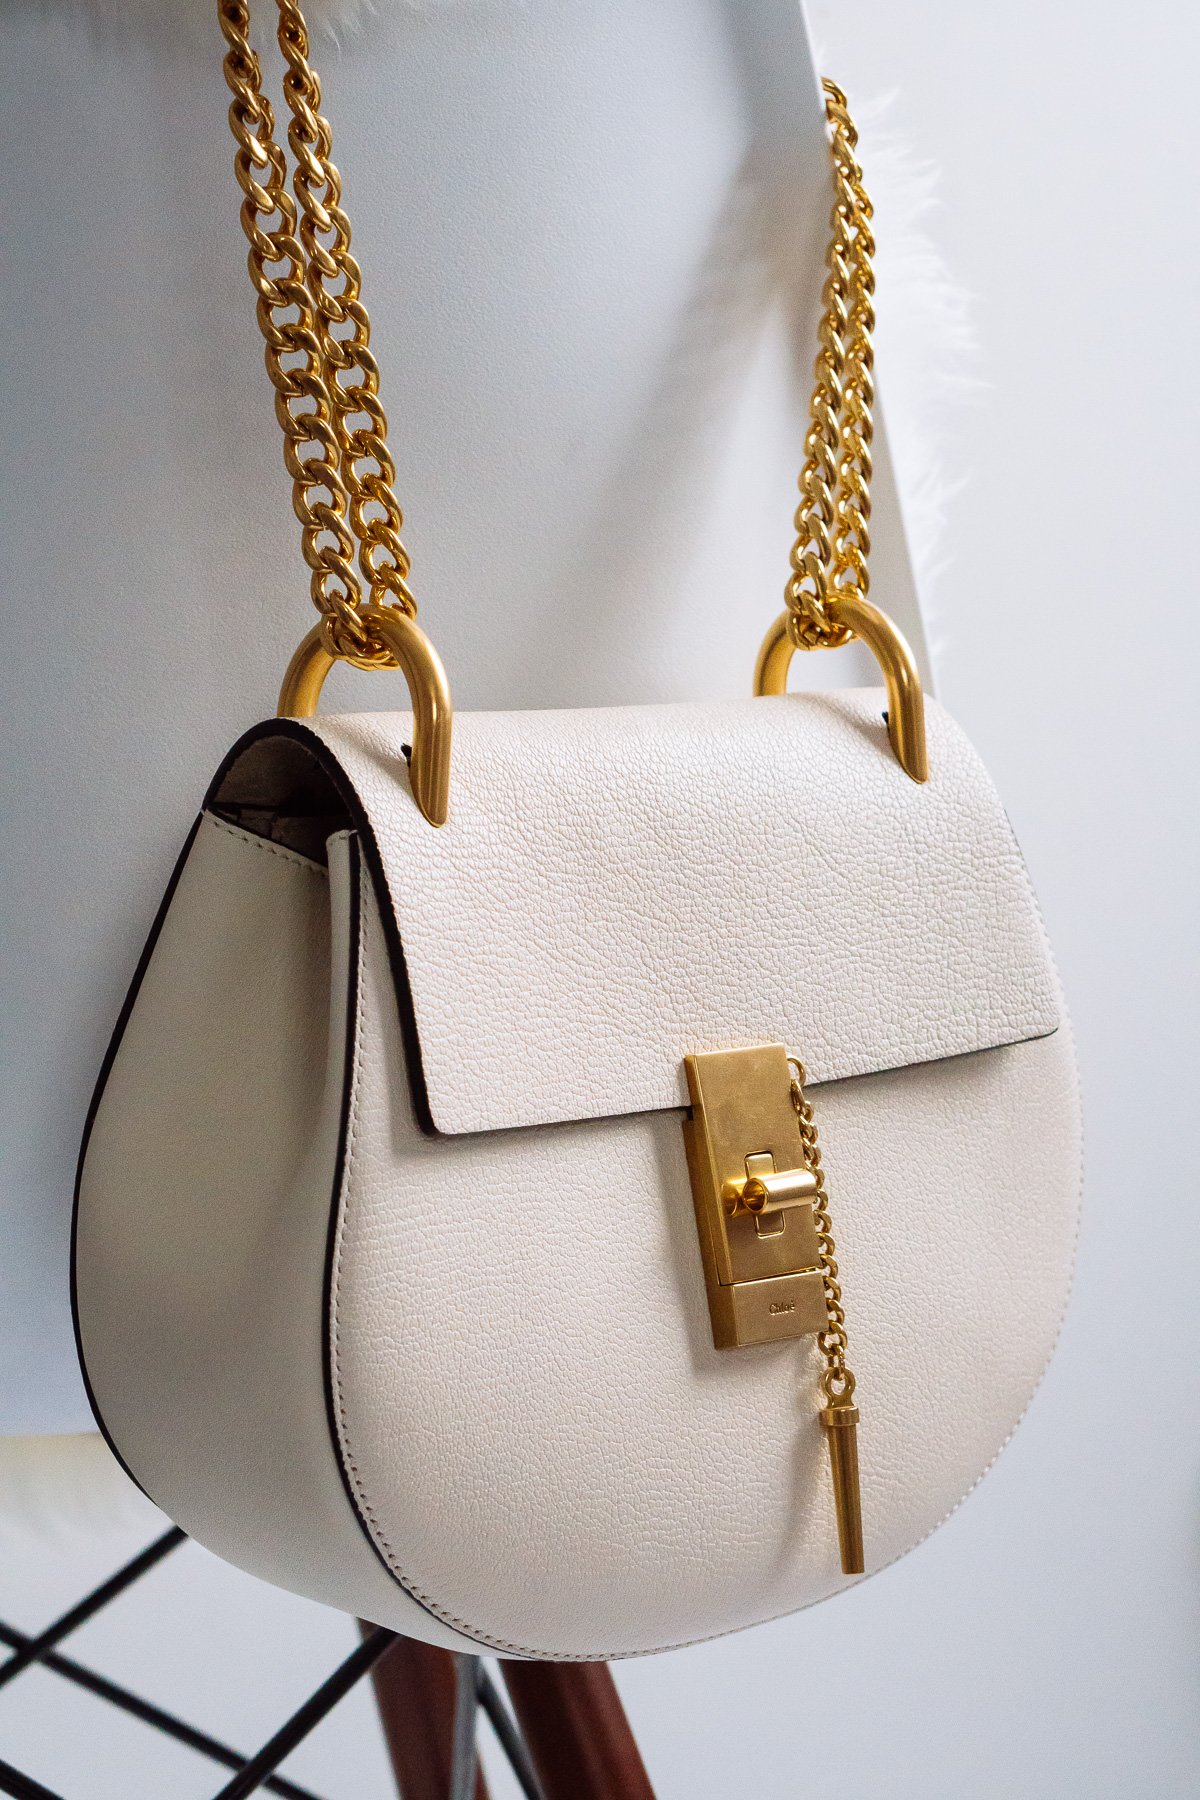 Chloe Drew Bag Leather Suede New Authentic Special Edition | eBay